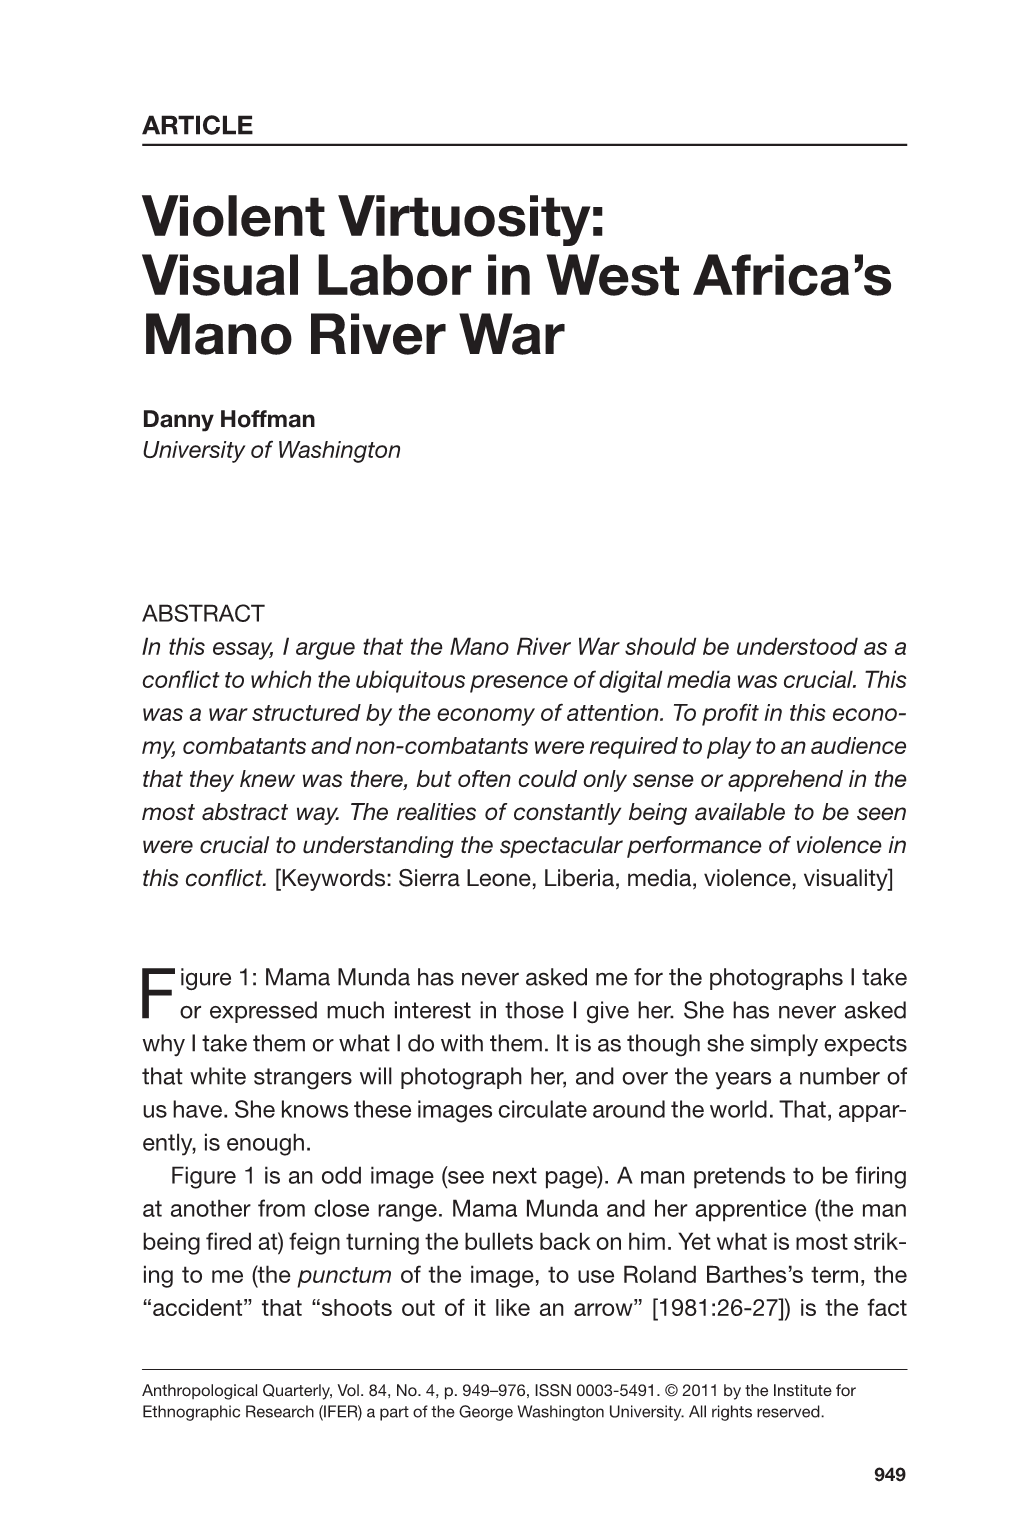 Violent Virtuosity: Visual Labor in West Africa's Mano River